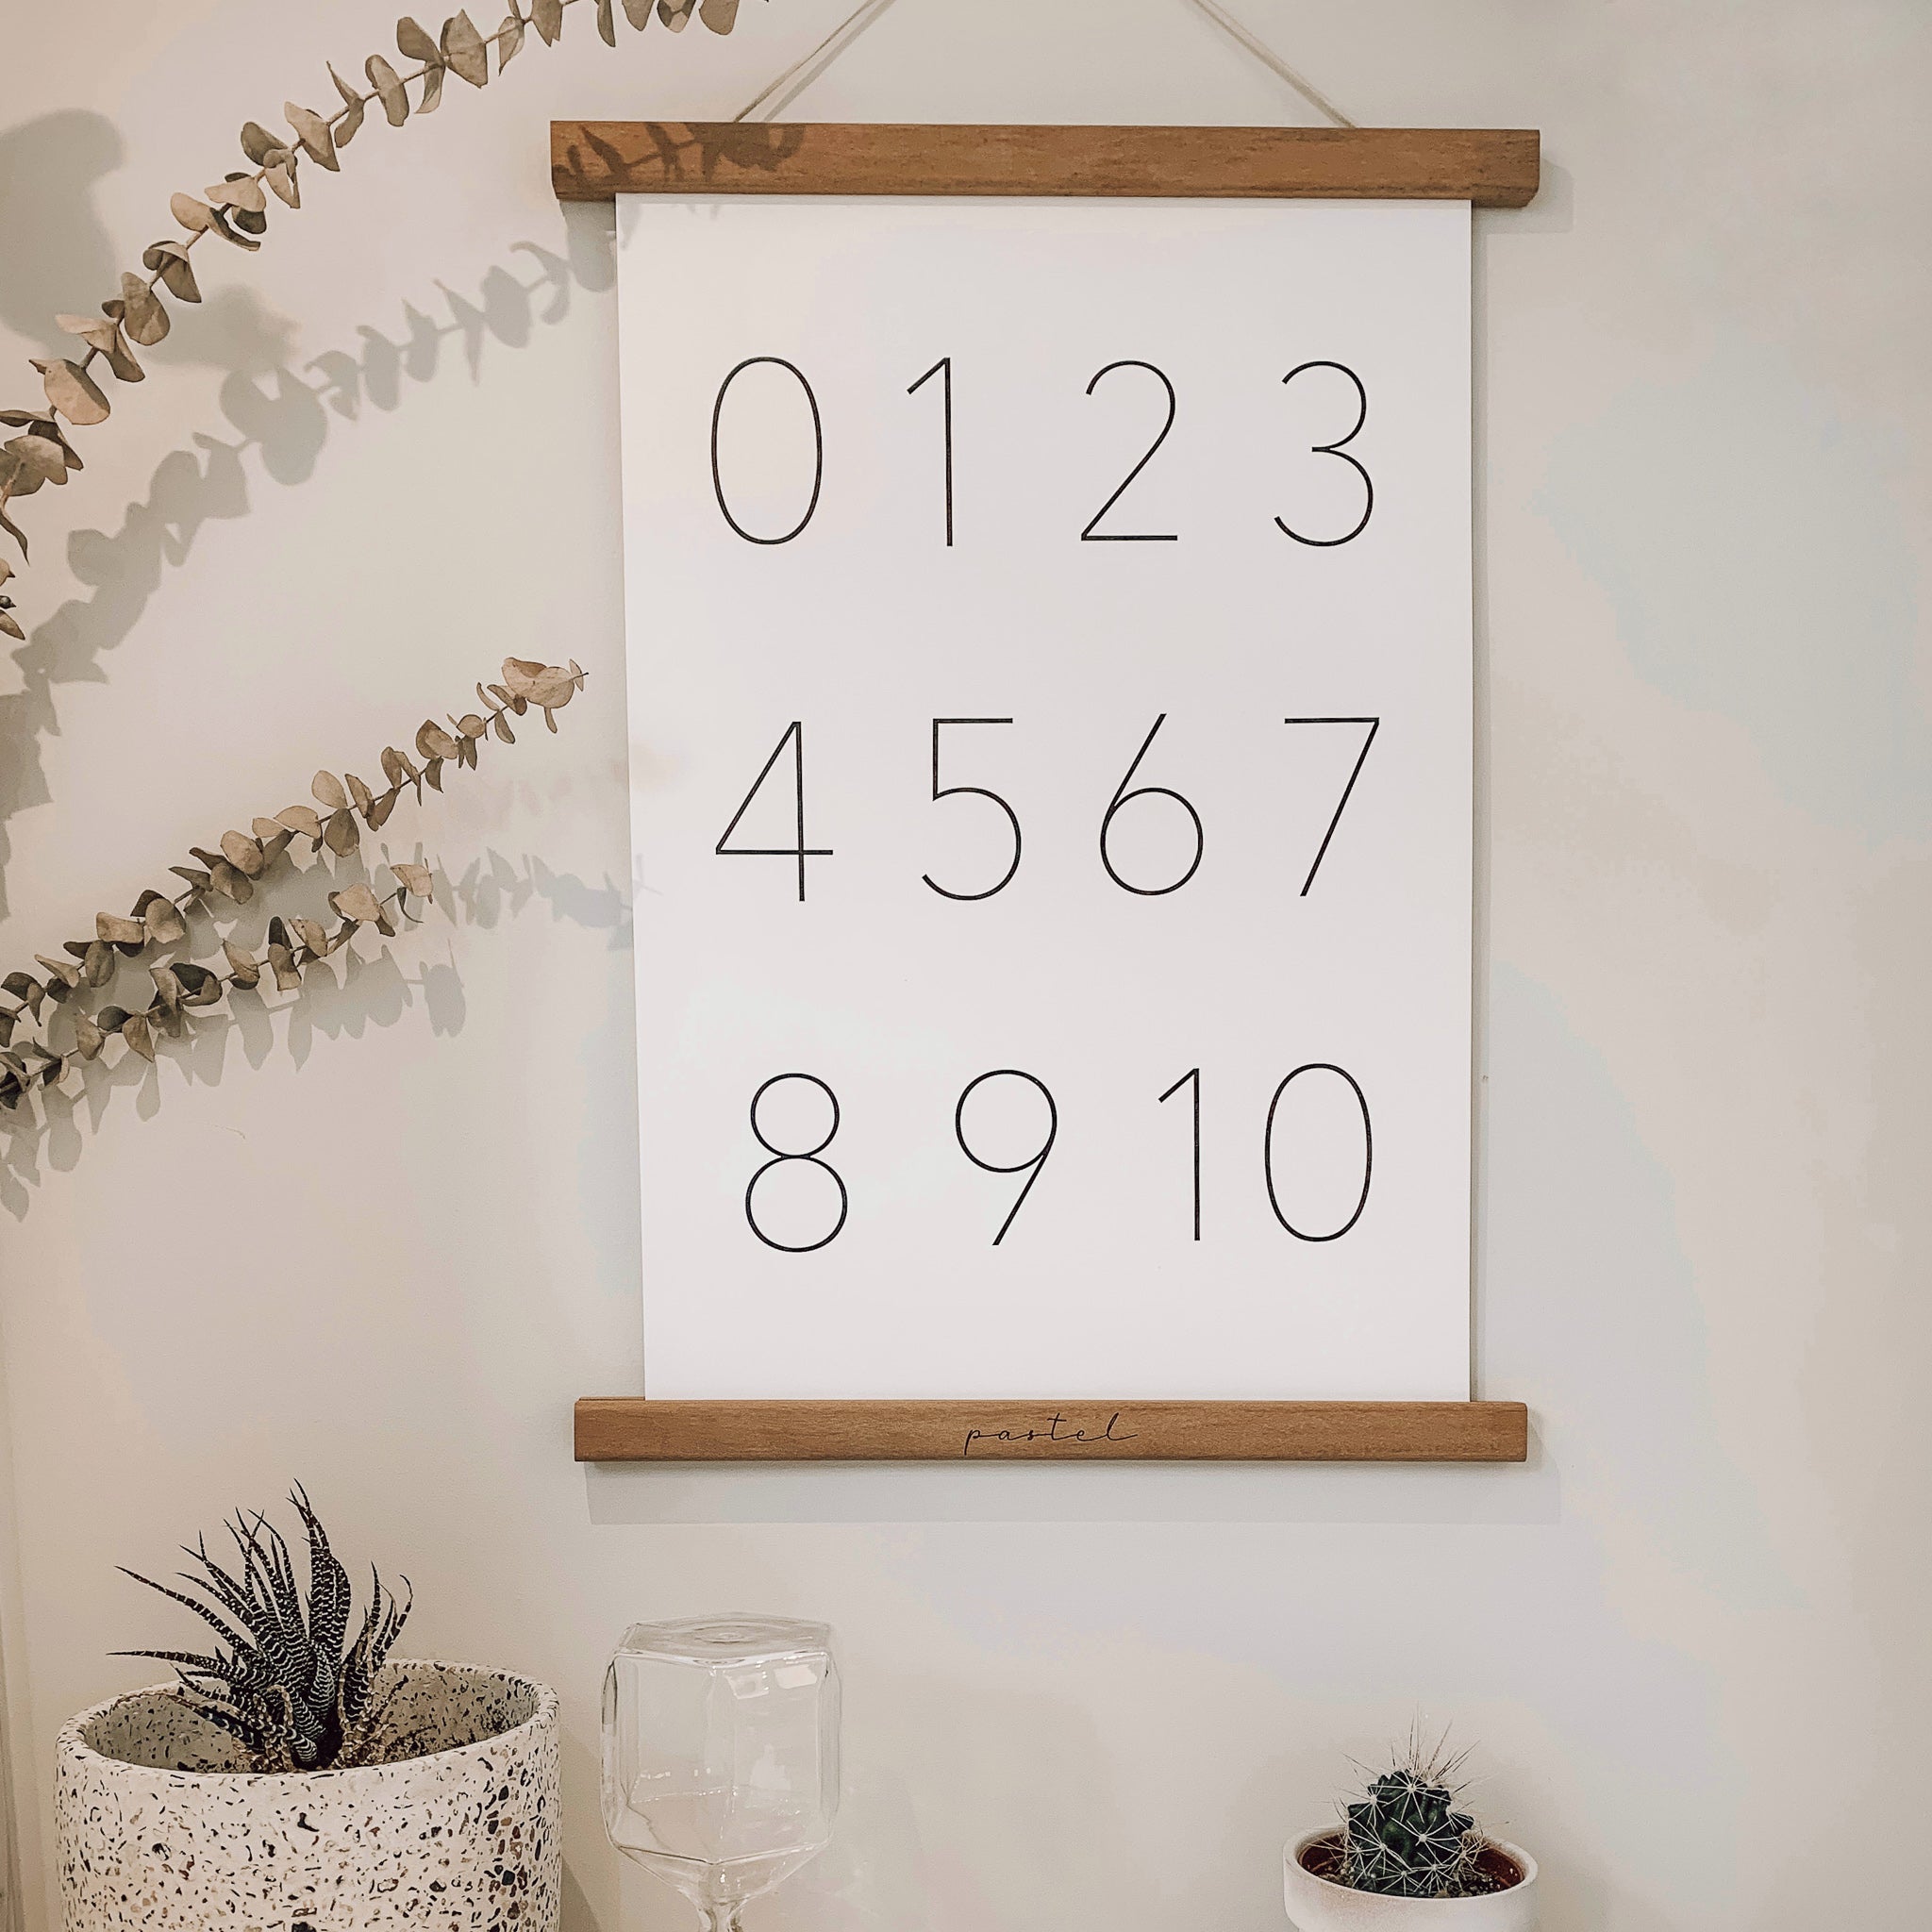 Decorative & Educational Poster "Numbers"